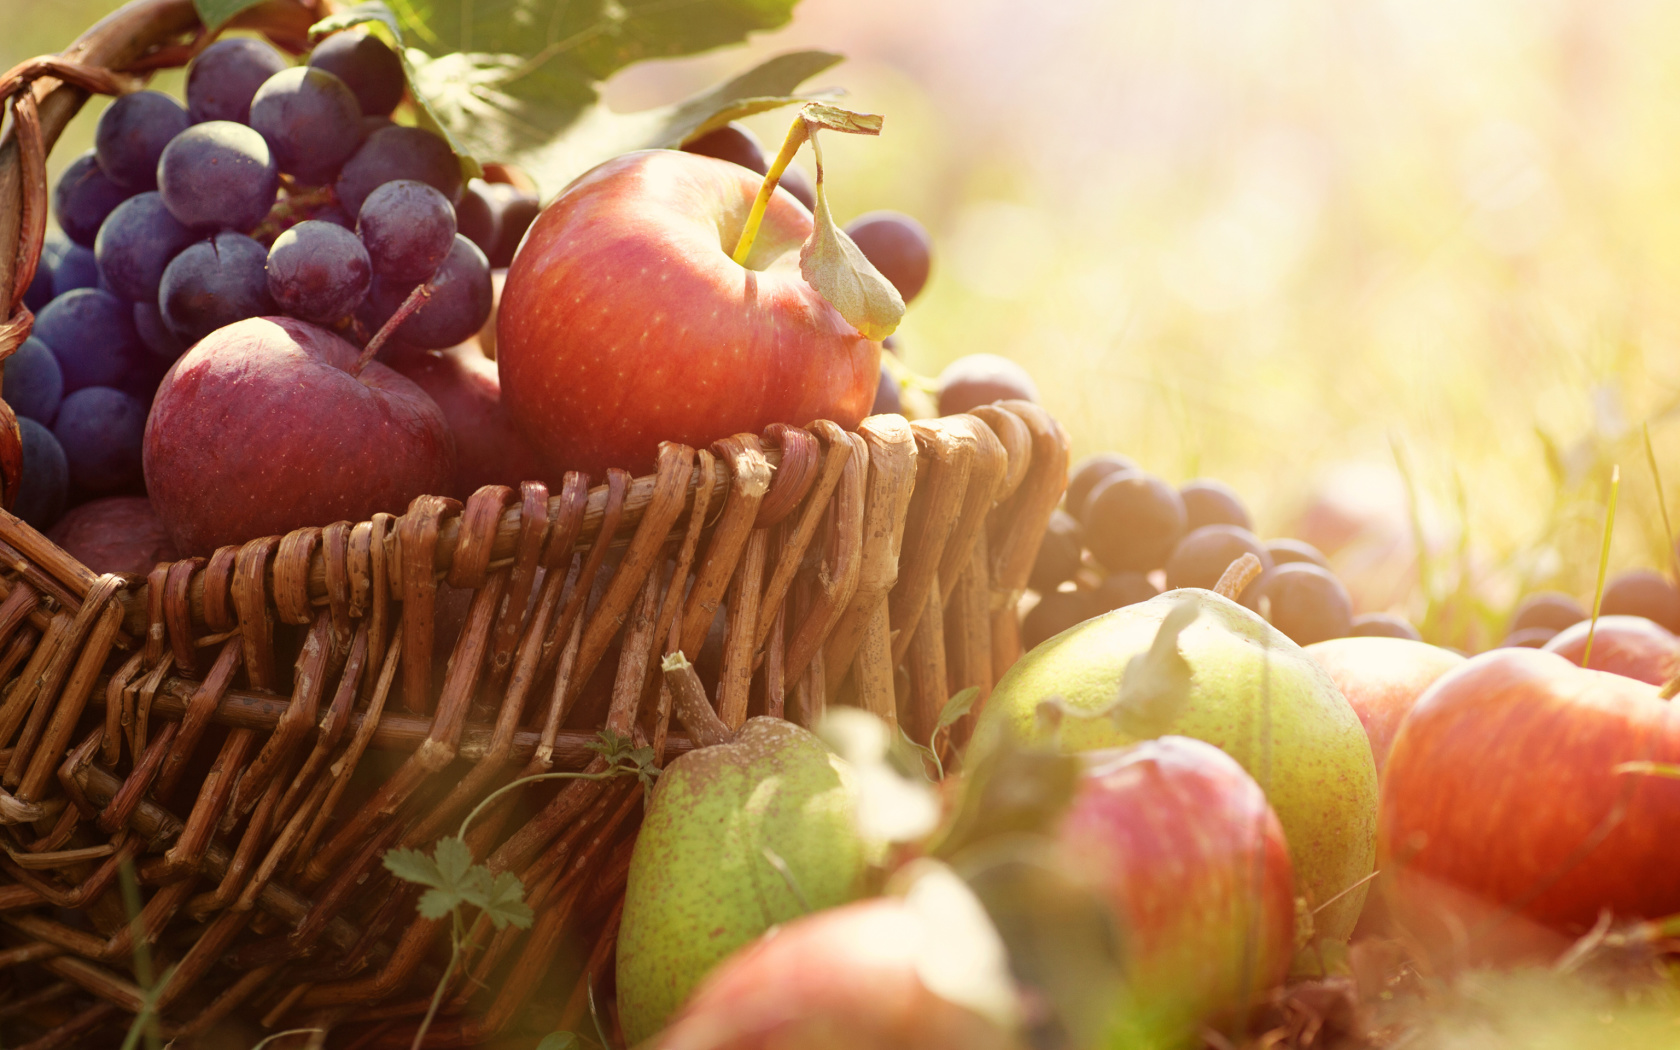 Apples and Grapes wallpaper 1680x1050